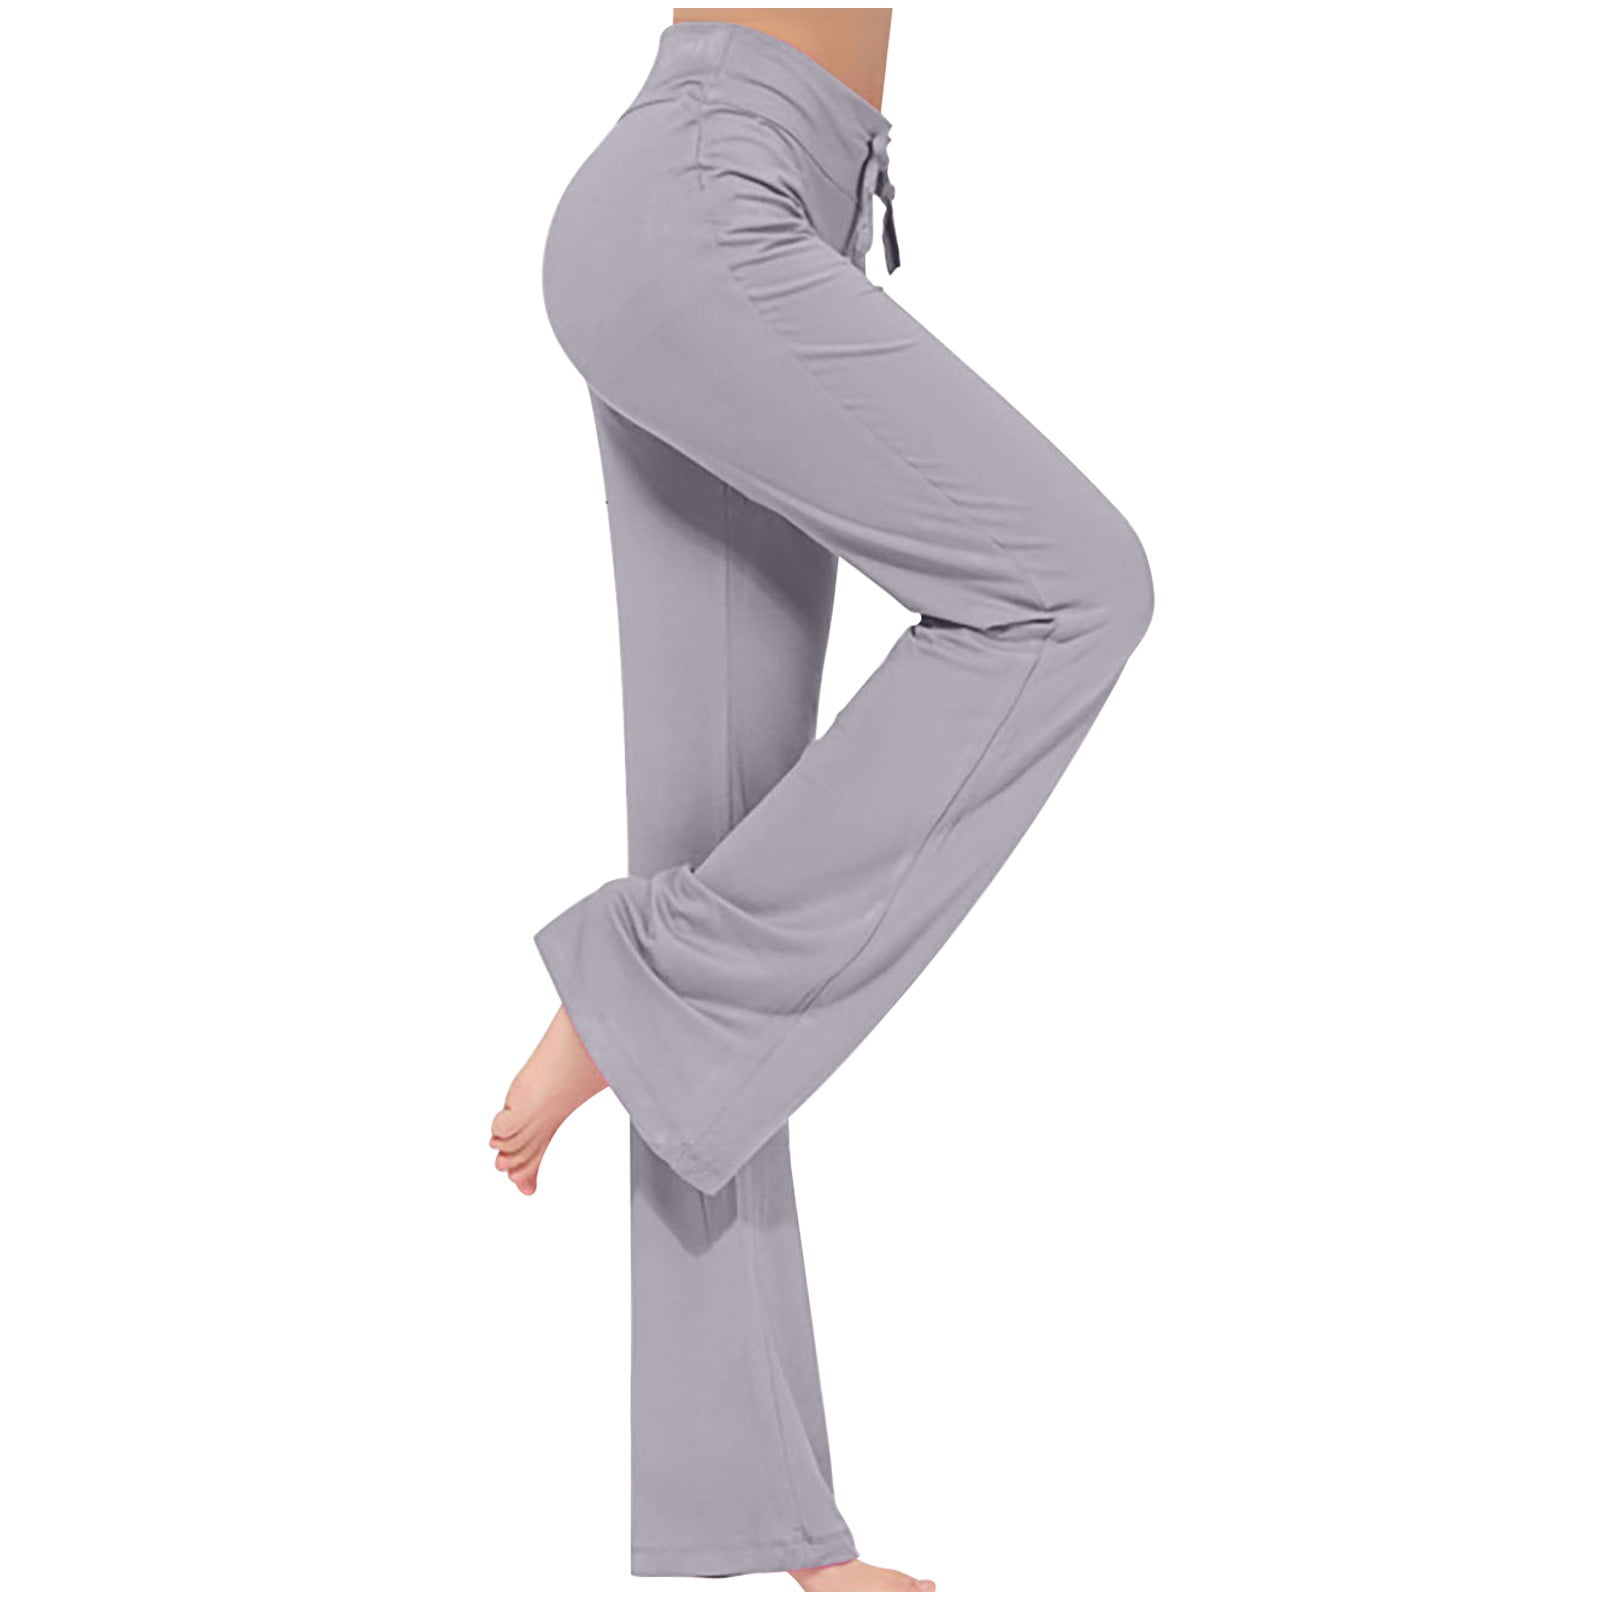 Wide Leg Yoga Pants for Women Loose Comfy Flare Sweatpants with Pockets  High Waist Stretch Pants Regular Fit Trouser Pant Gray XXXL